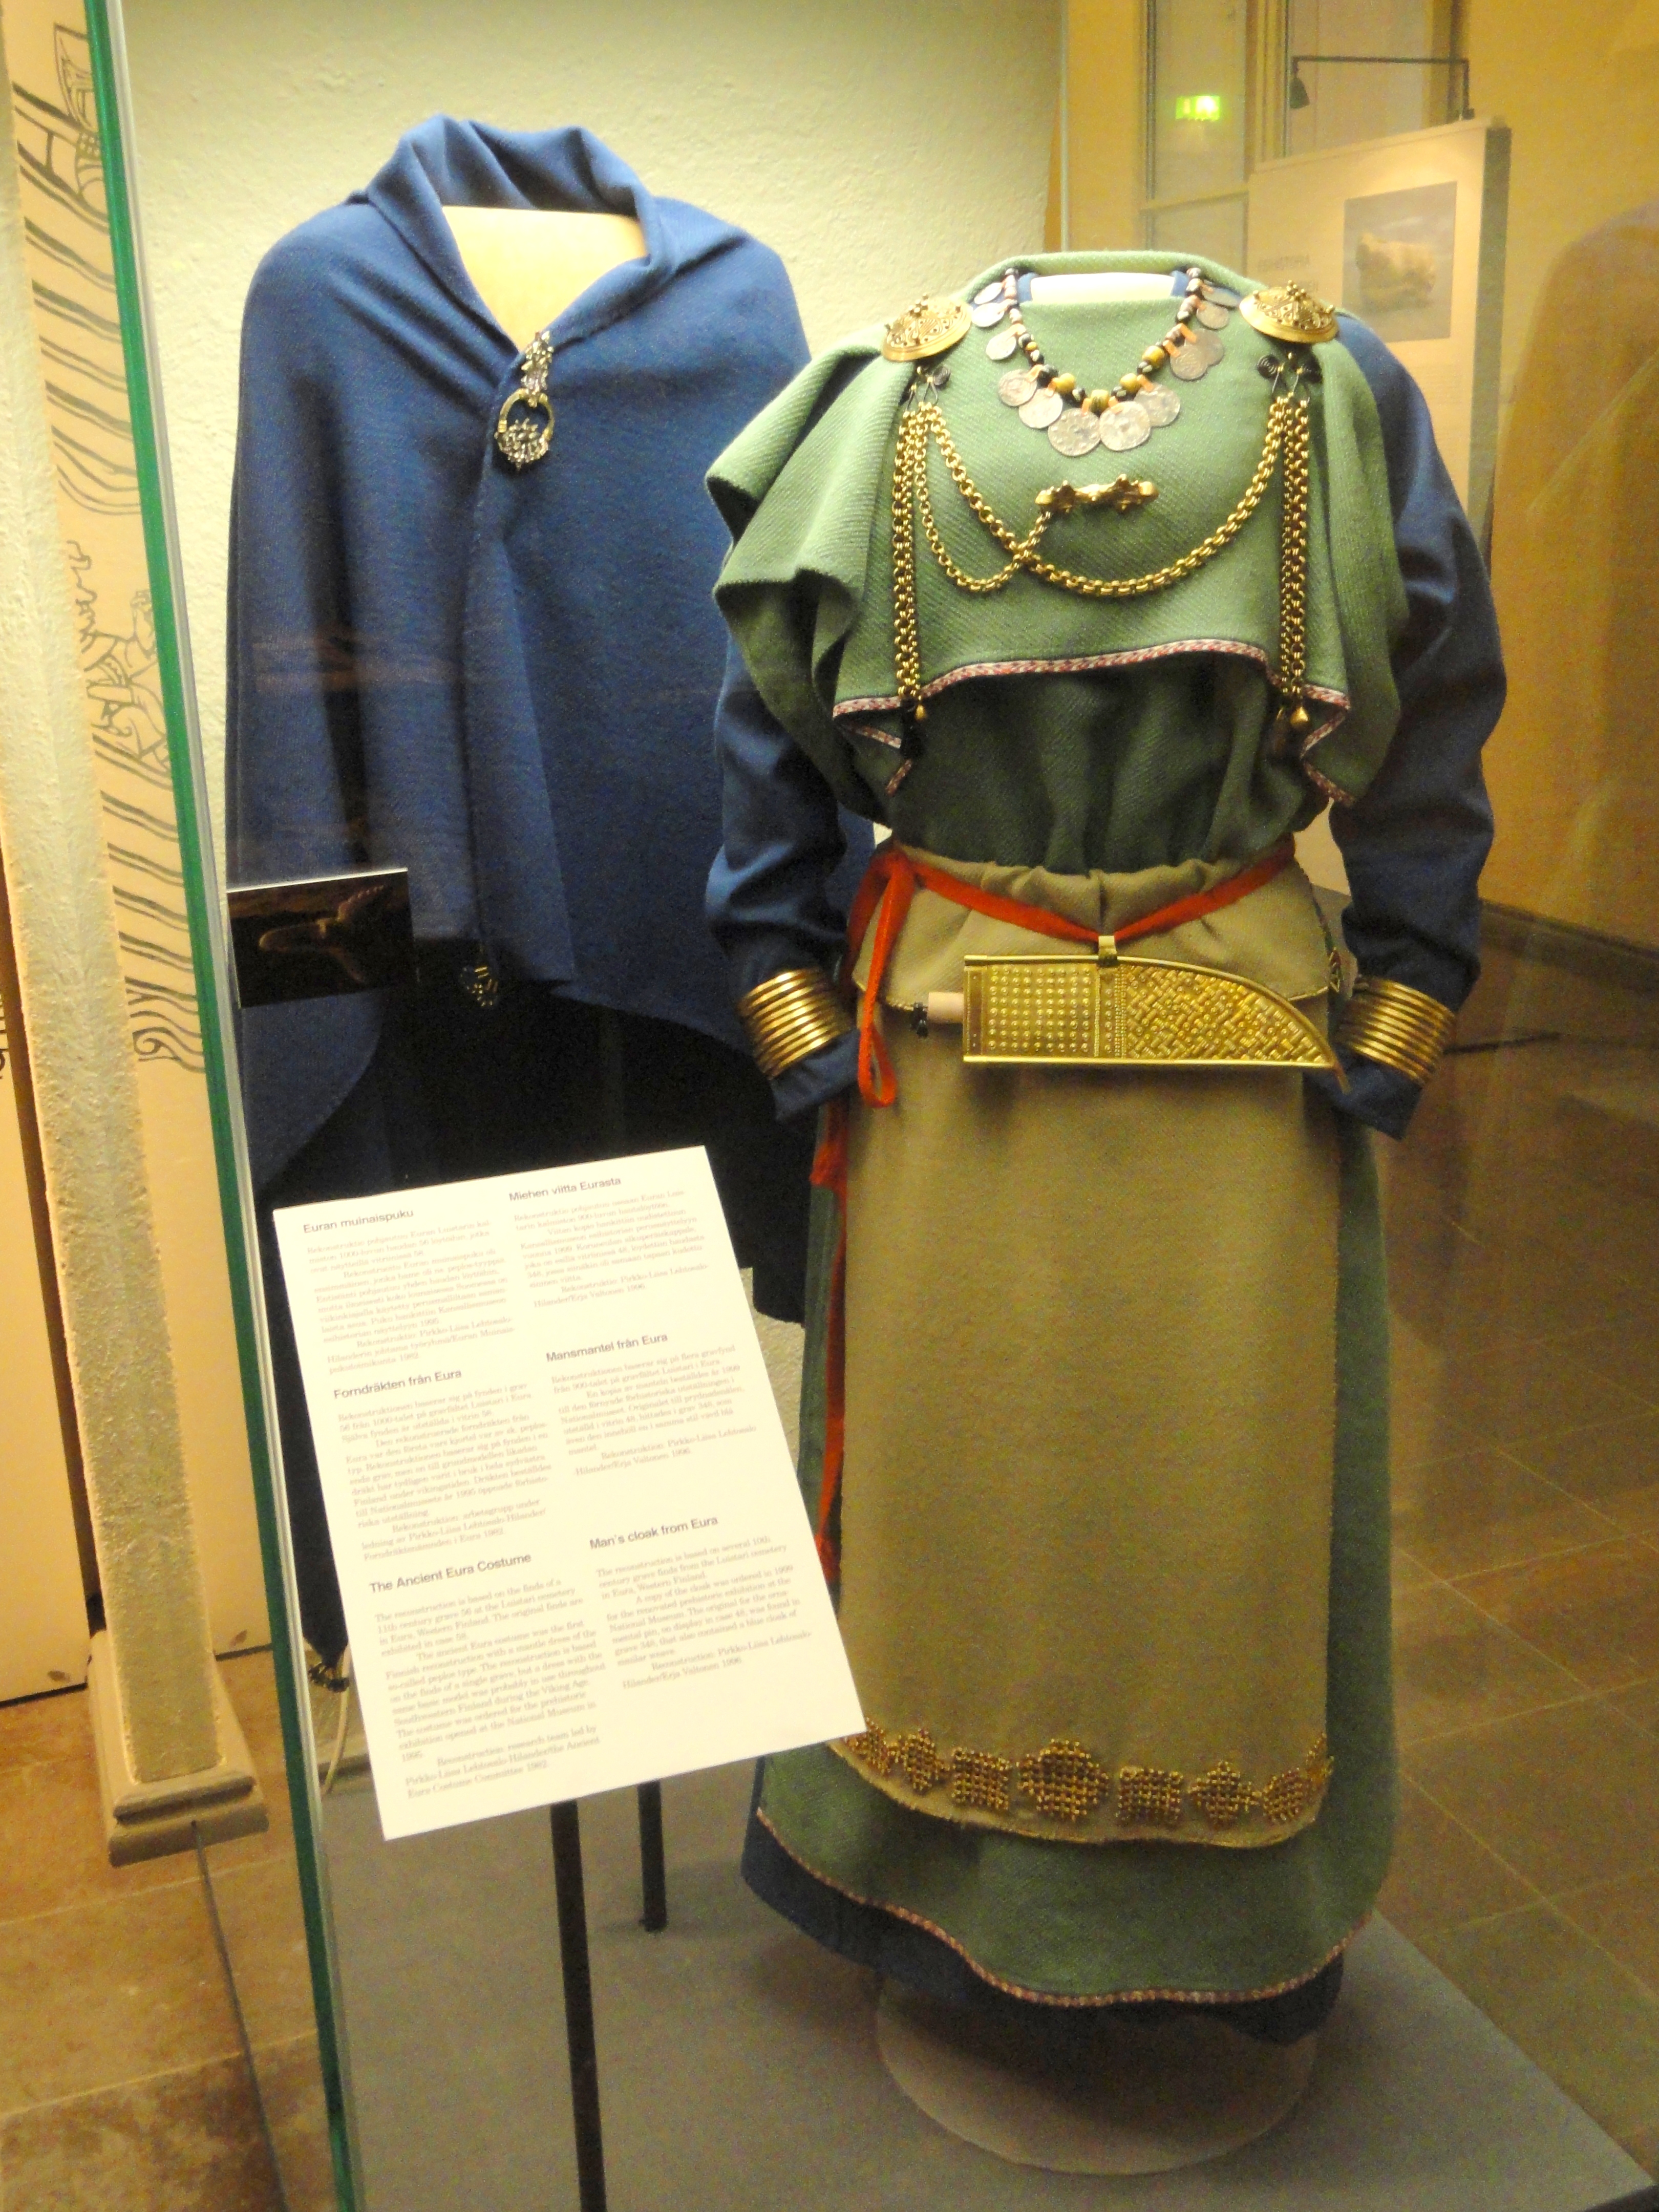 Eura_costume_reconstruction,_from_10th_and_11th_century_graves_-_National_Museum_of_Finland_-_DSC04196